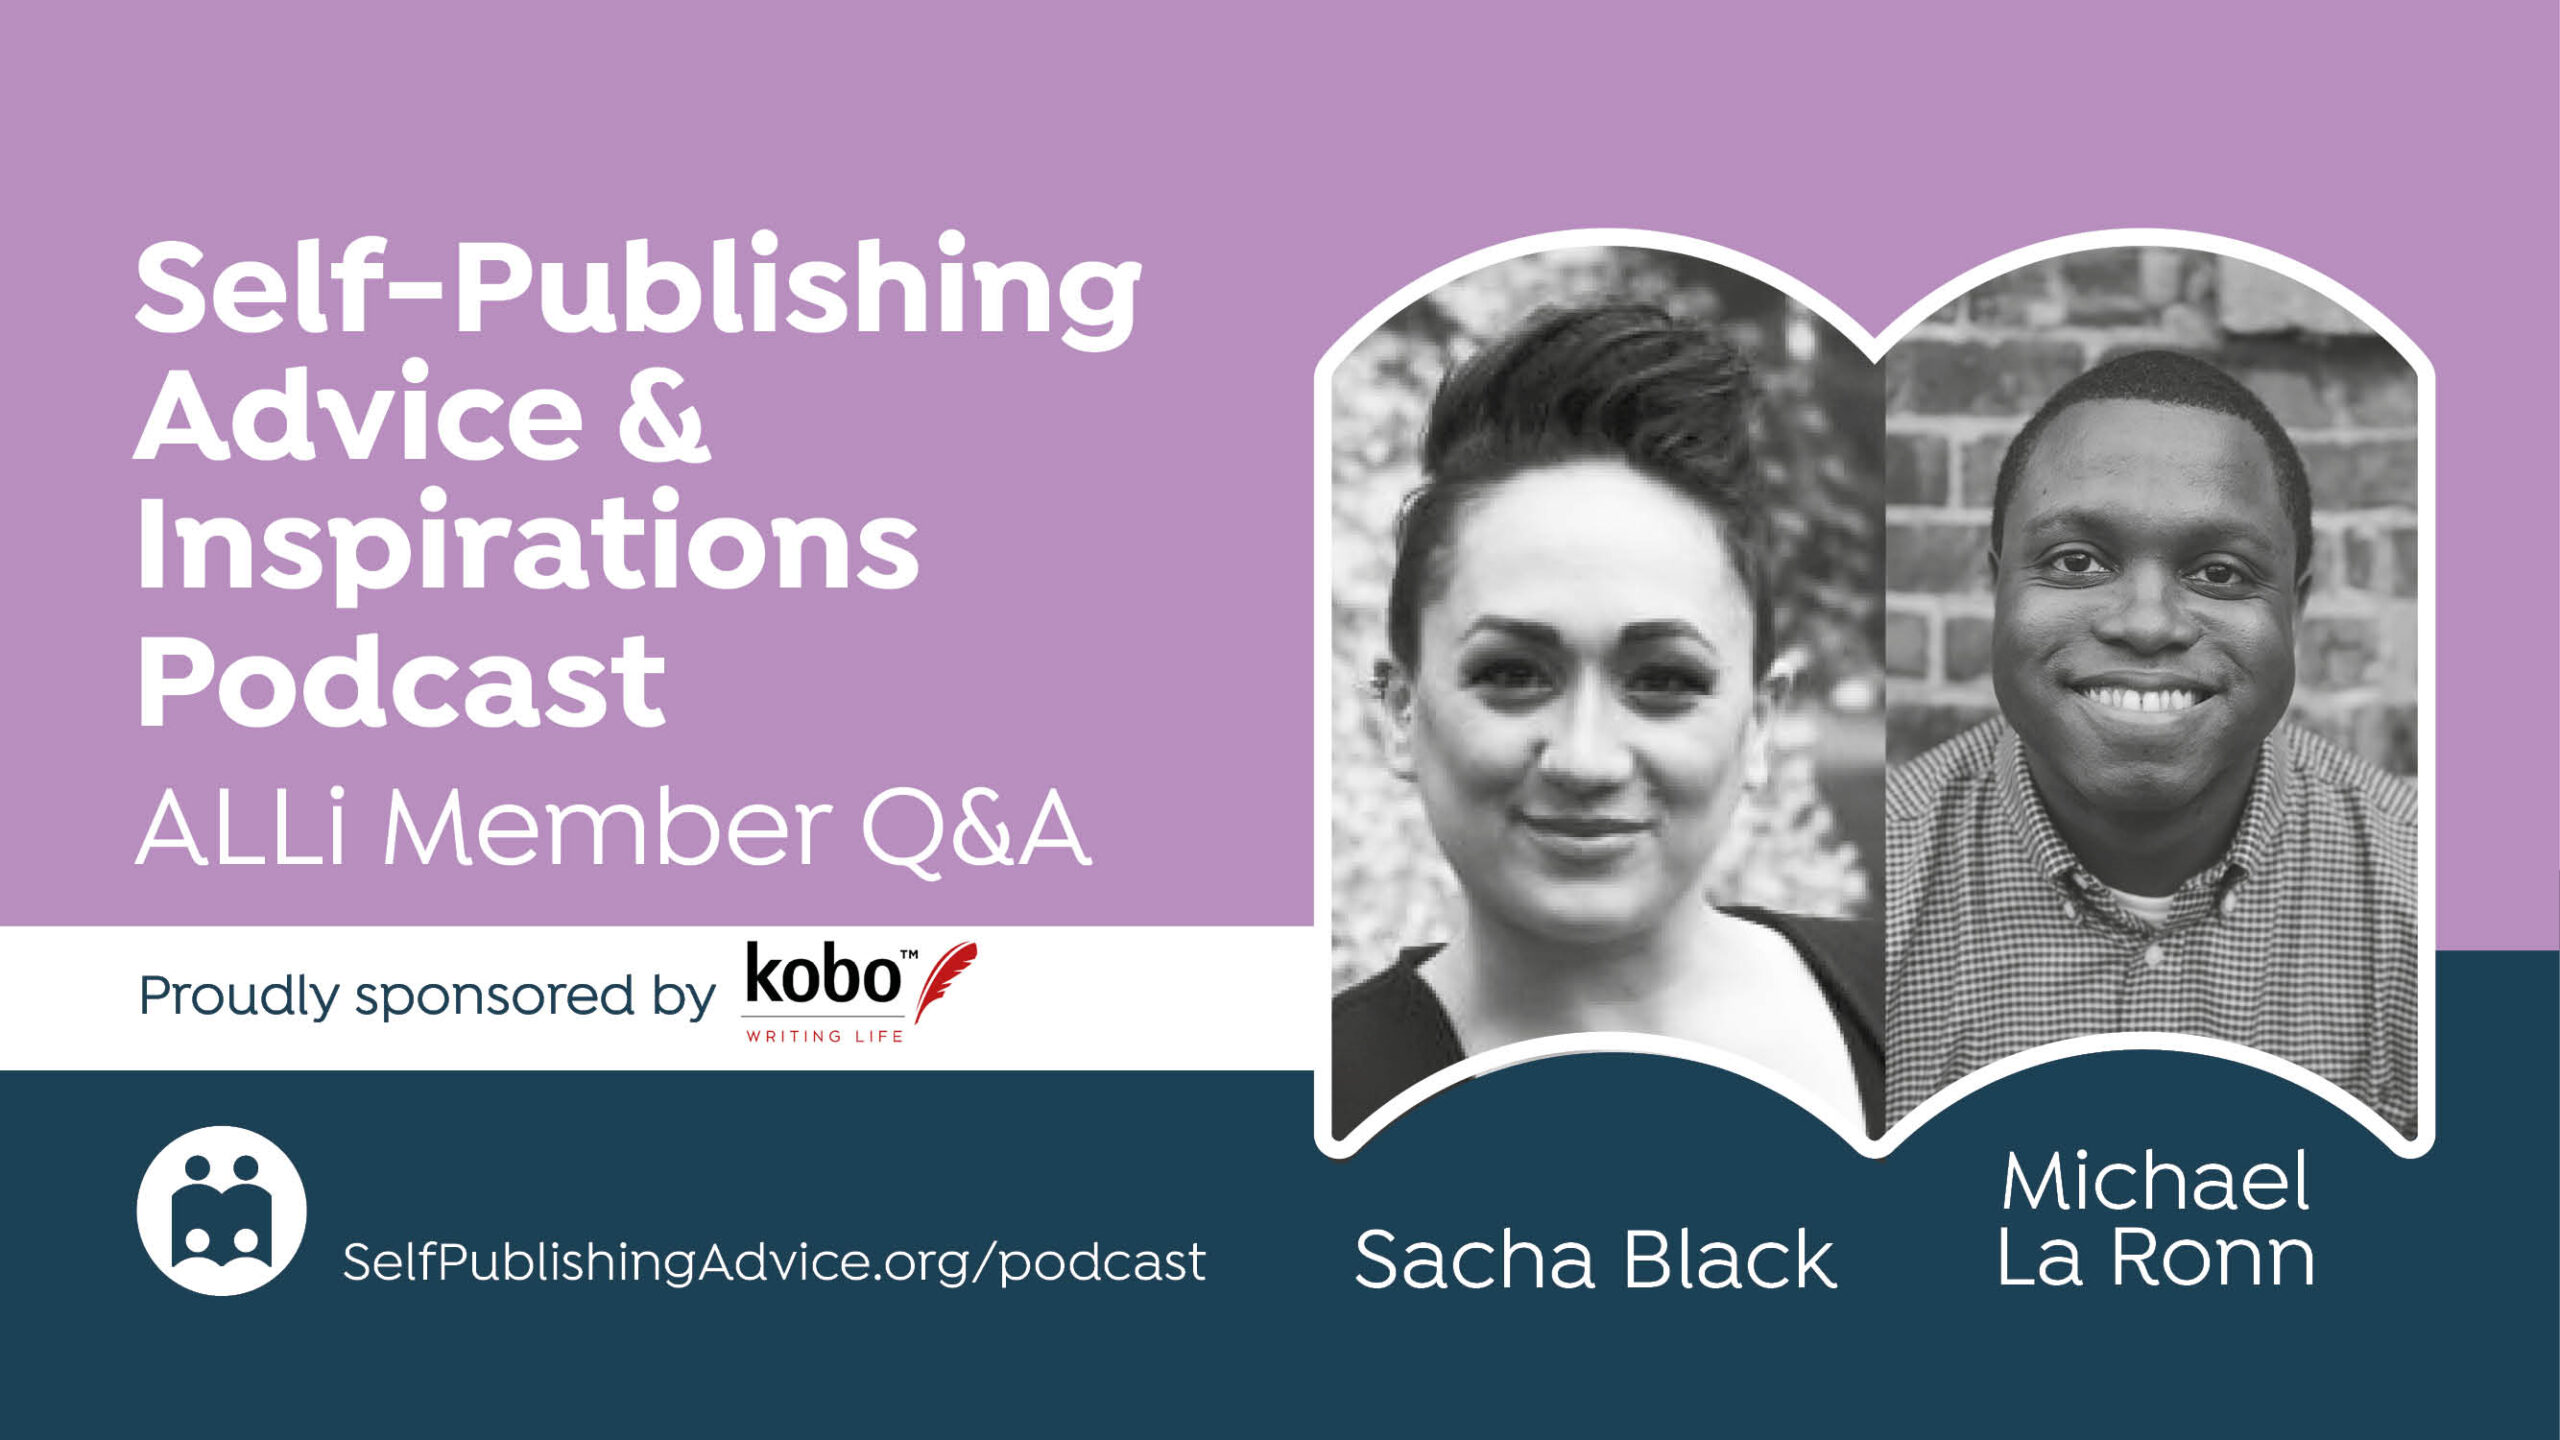 PODCAST: Design Plagiarism, Books Into Bookstores, Negotiating Rights, And More In Our ALLi Member Q&A